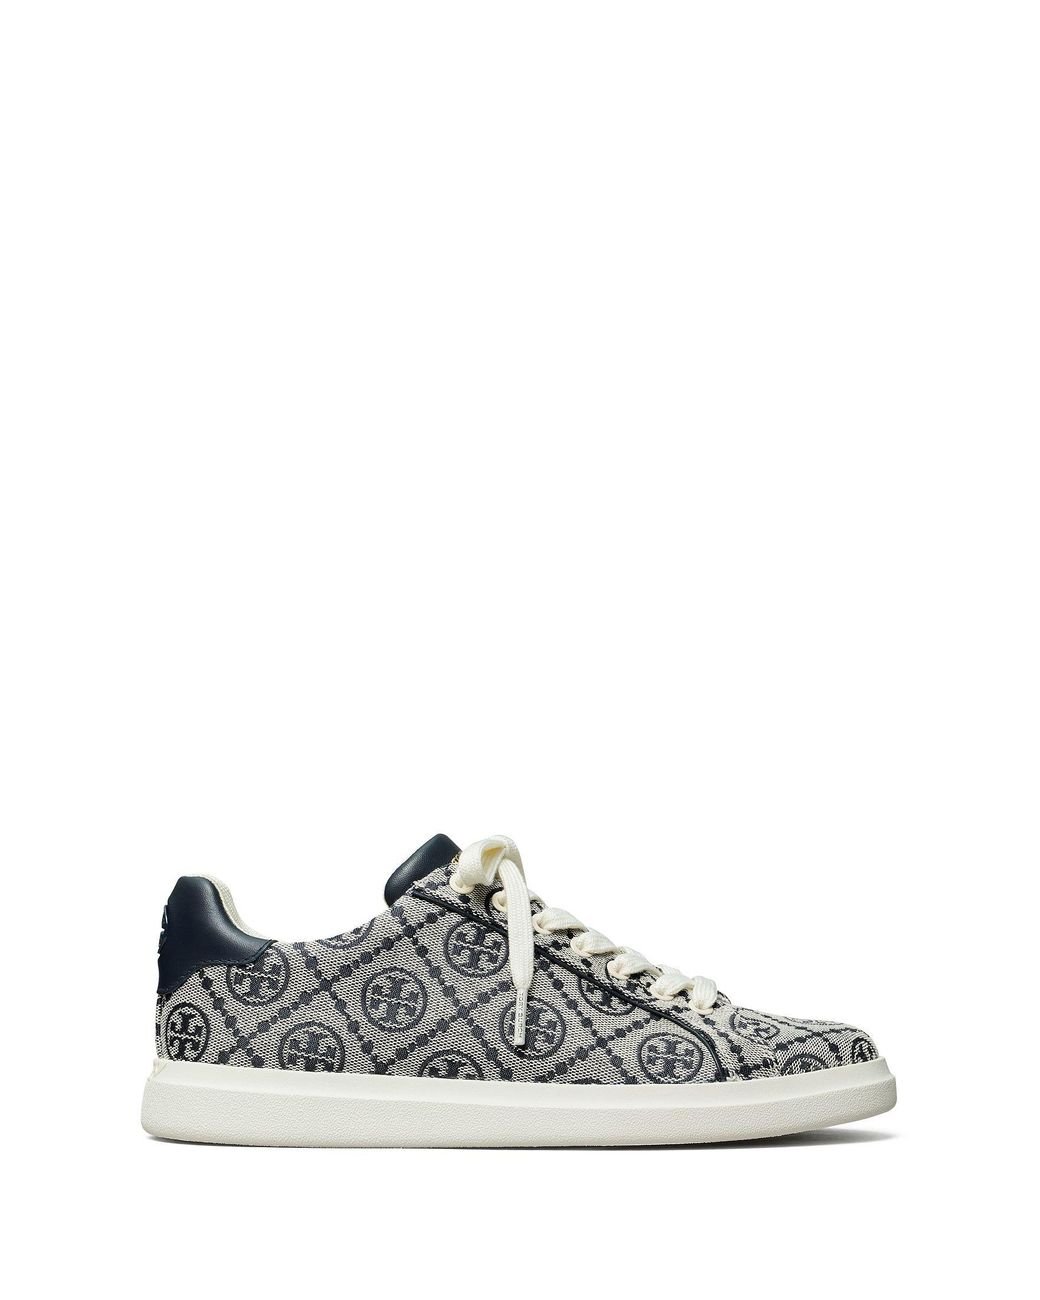 Tory Burch Leather Howell T Monogram Court Sneaker in Blue - Lyst